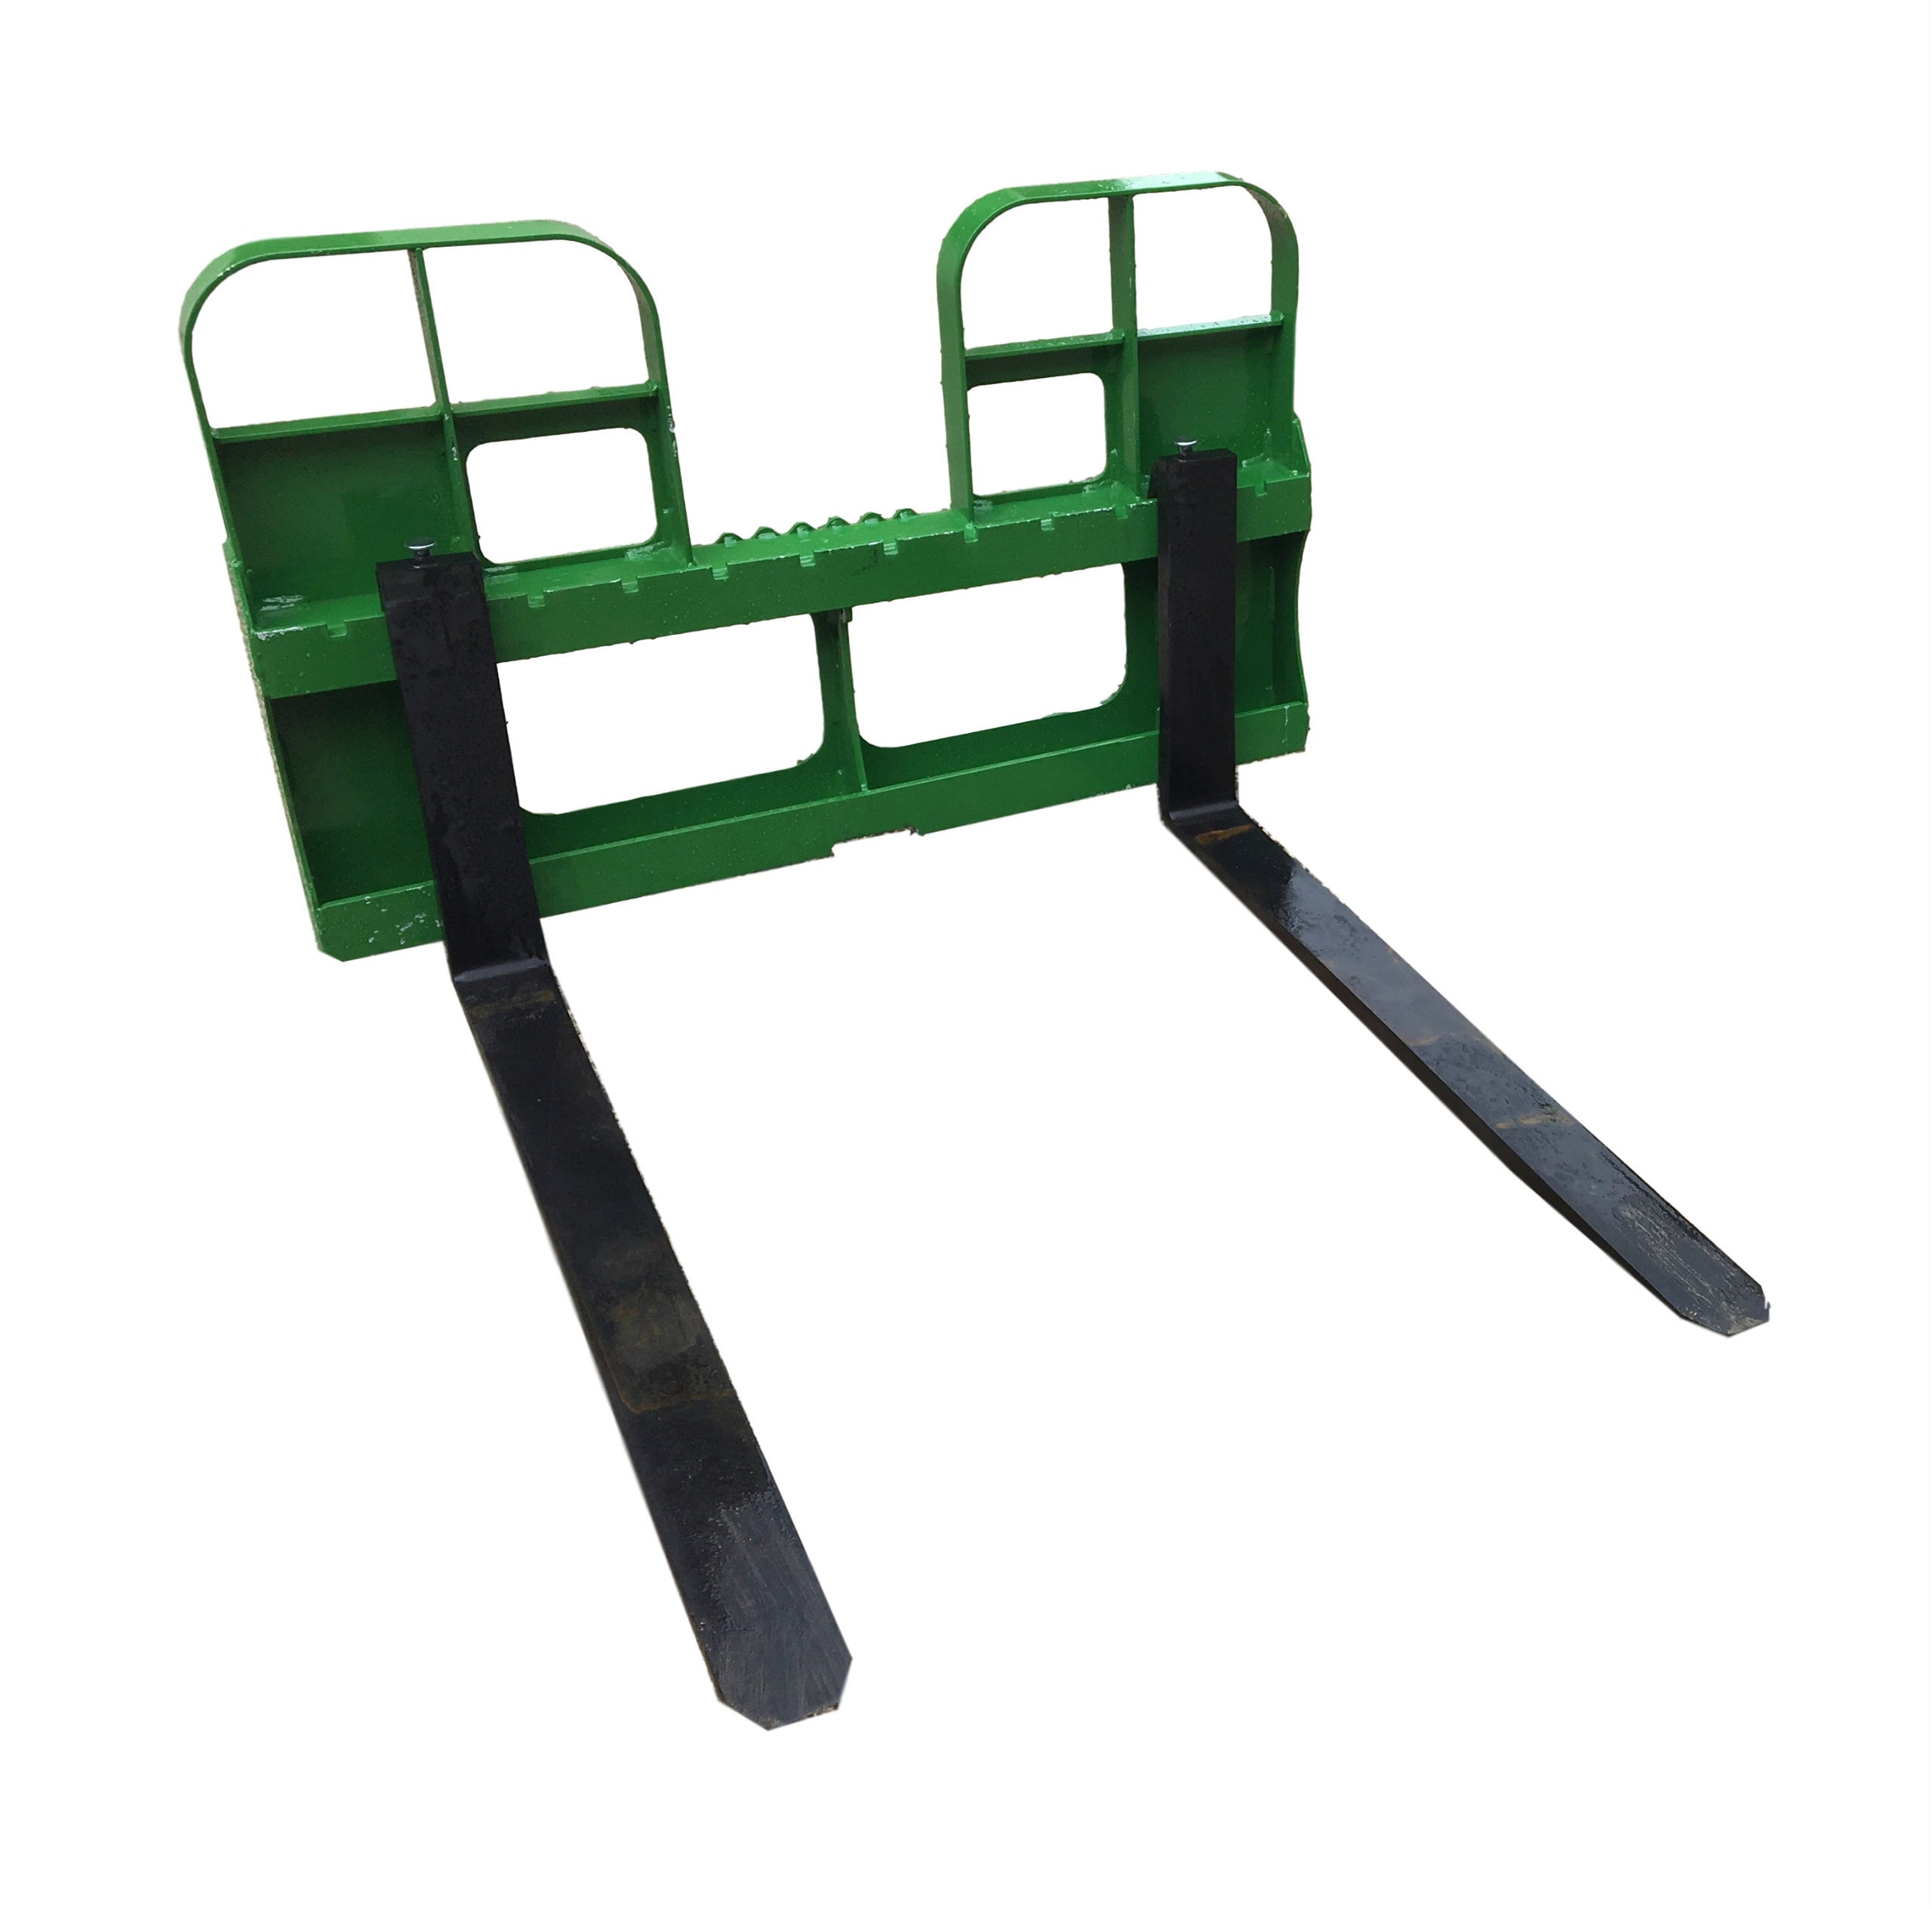 4200 Lb Capacity Hla Pallet Forks With 48 Tines In John Deere Quick Attach